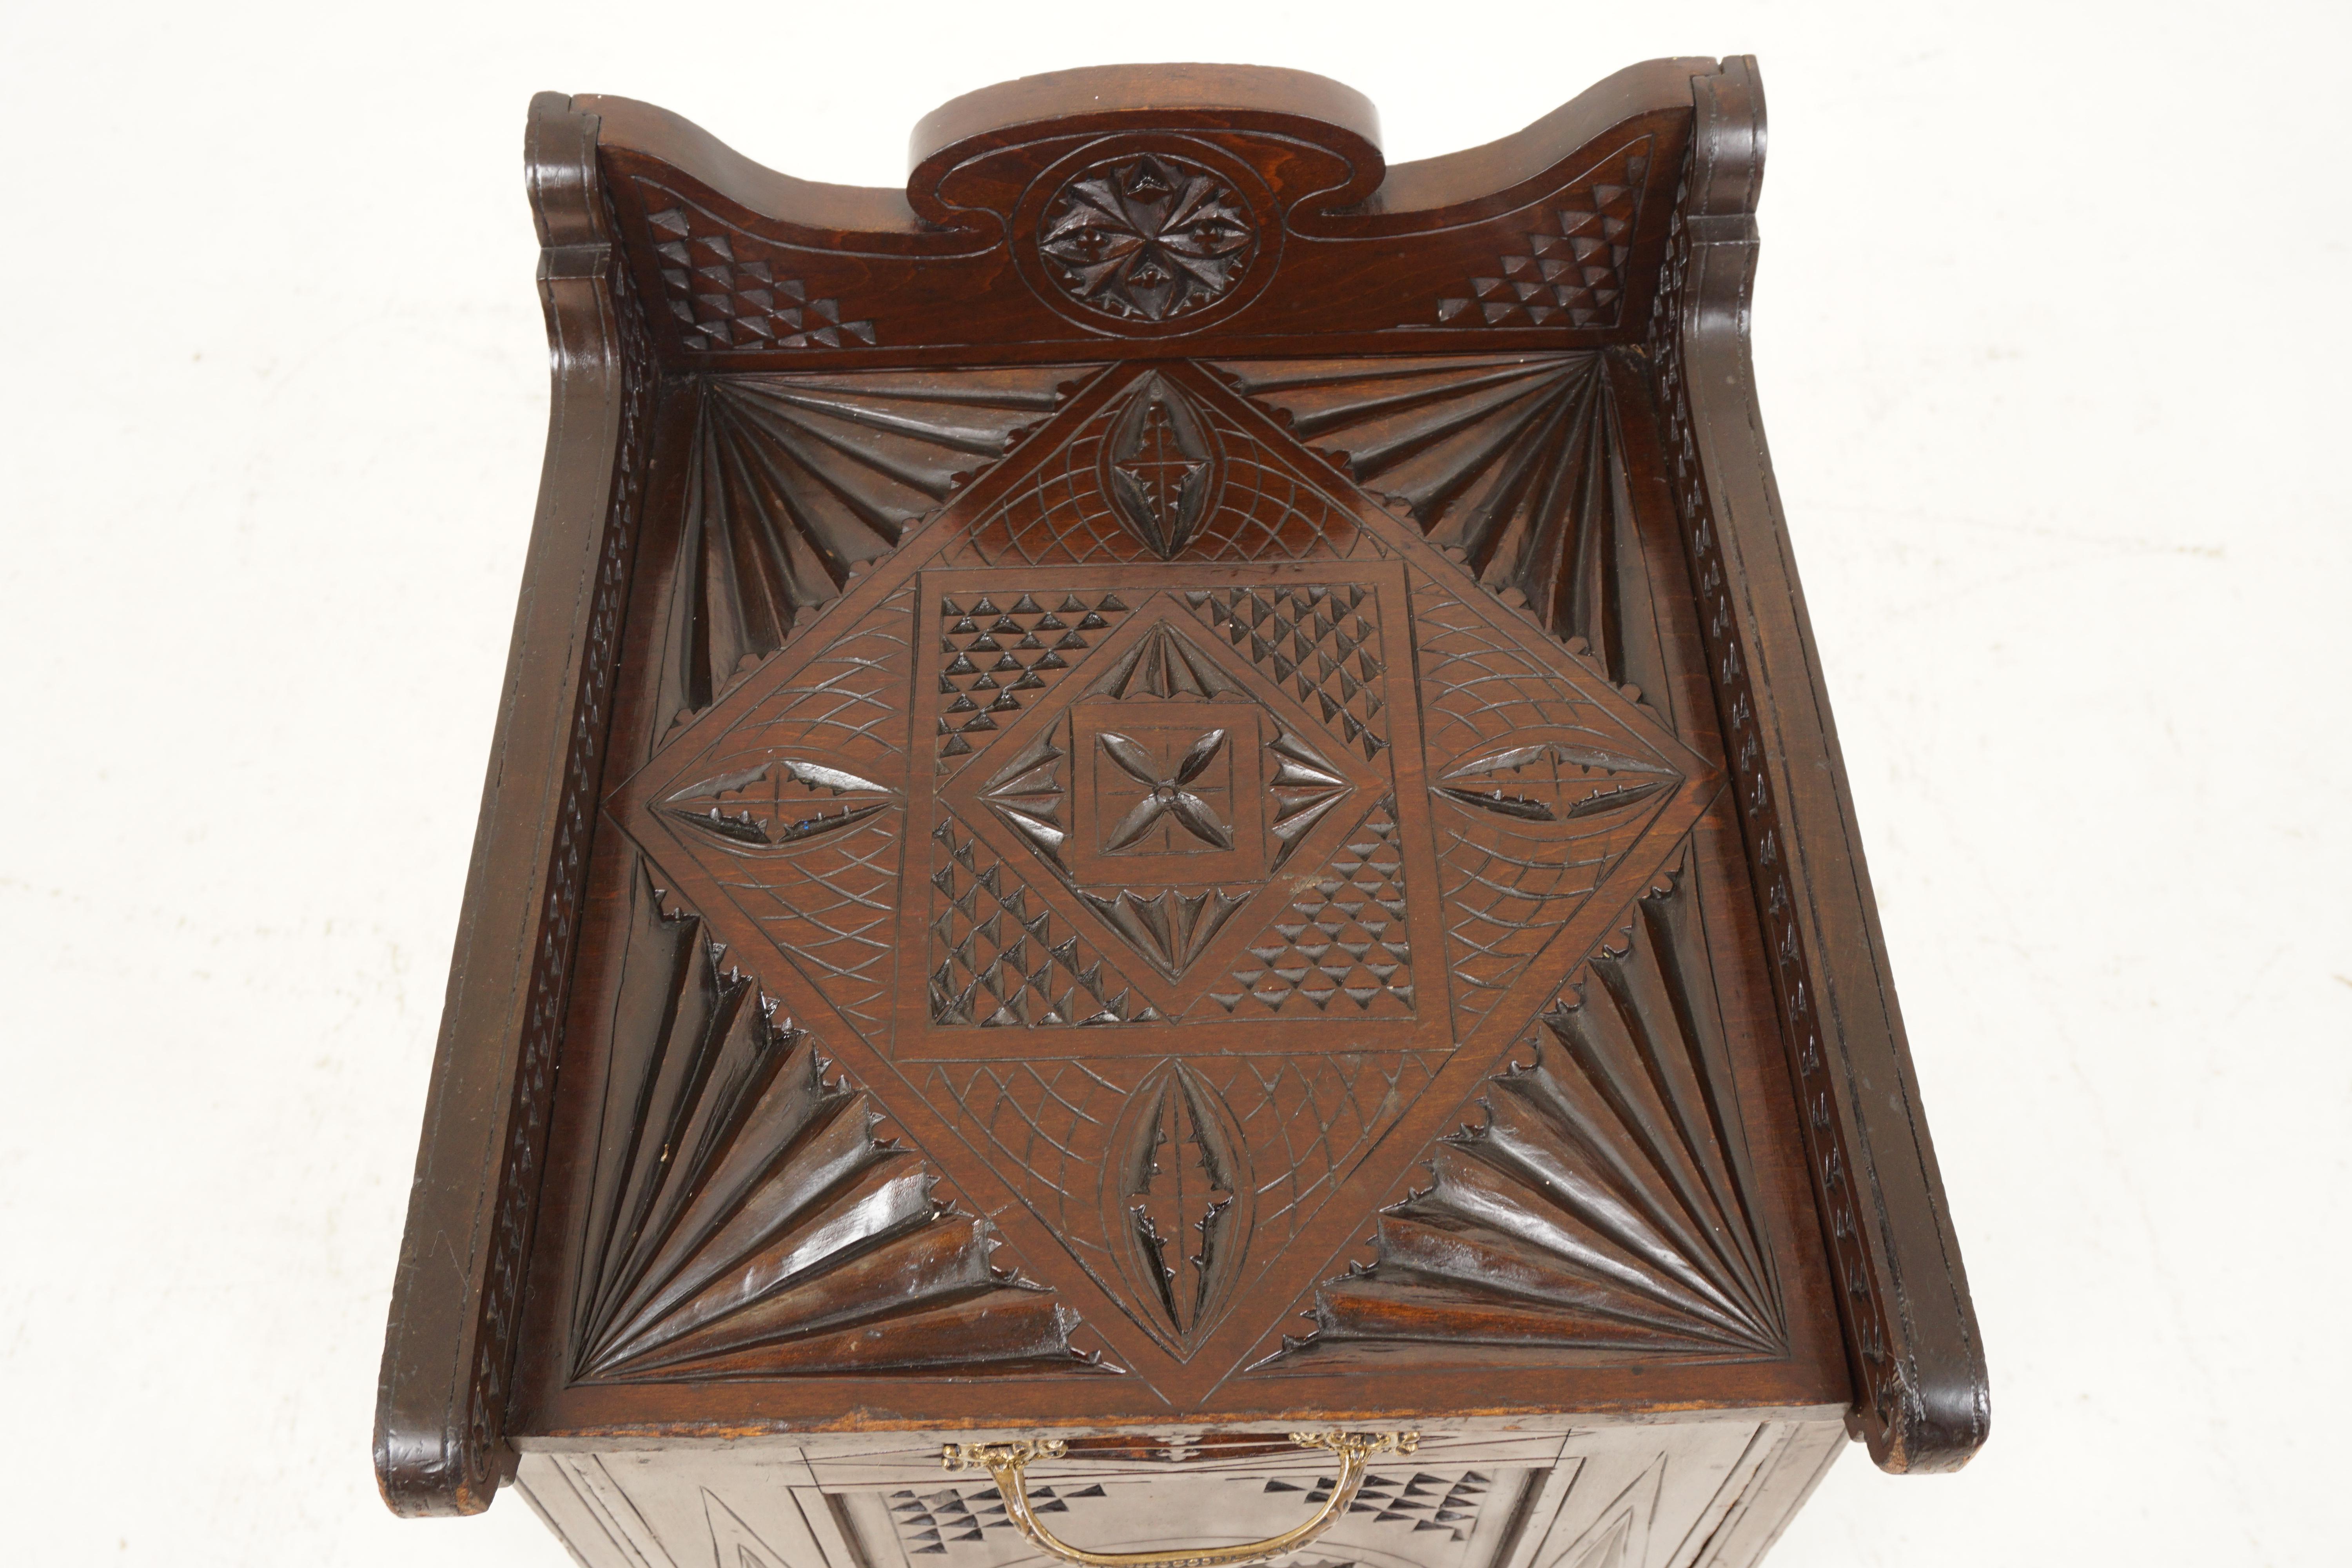 Hand-Crafted Antique Chipped Carved Coal Box, Scuttle Box, Purdonium, Scotland 1880, H268 For Sale